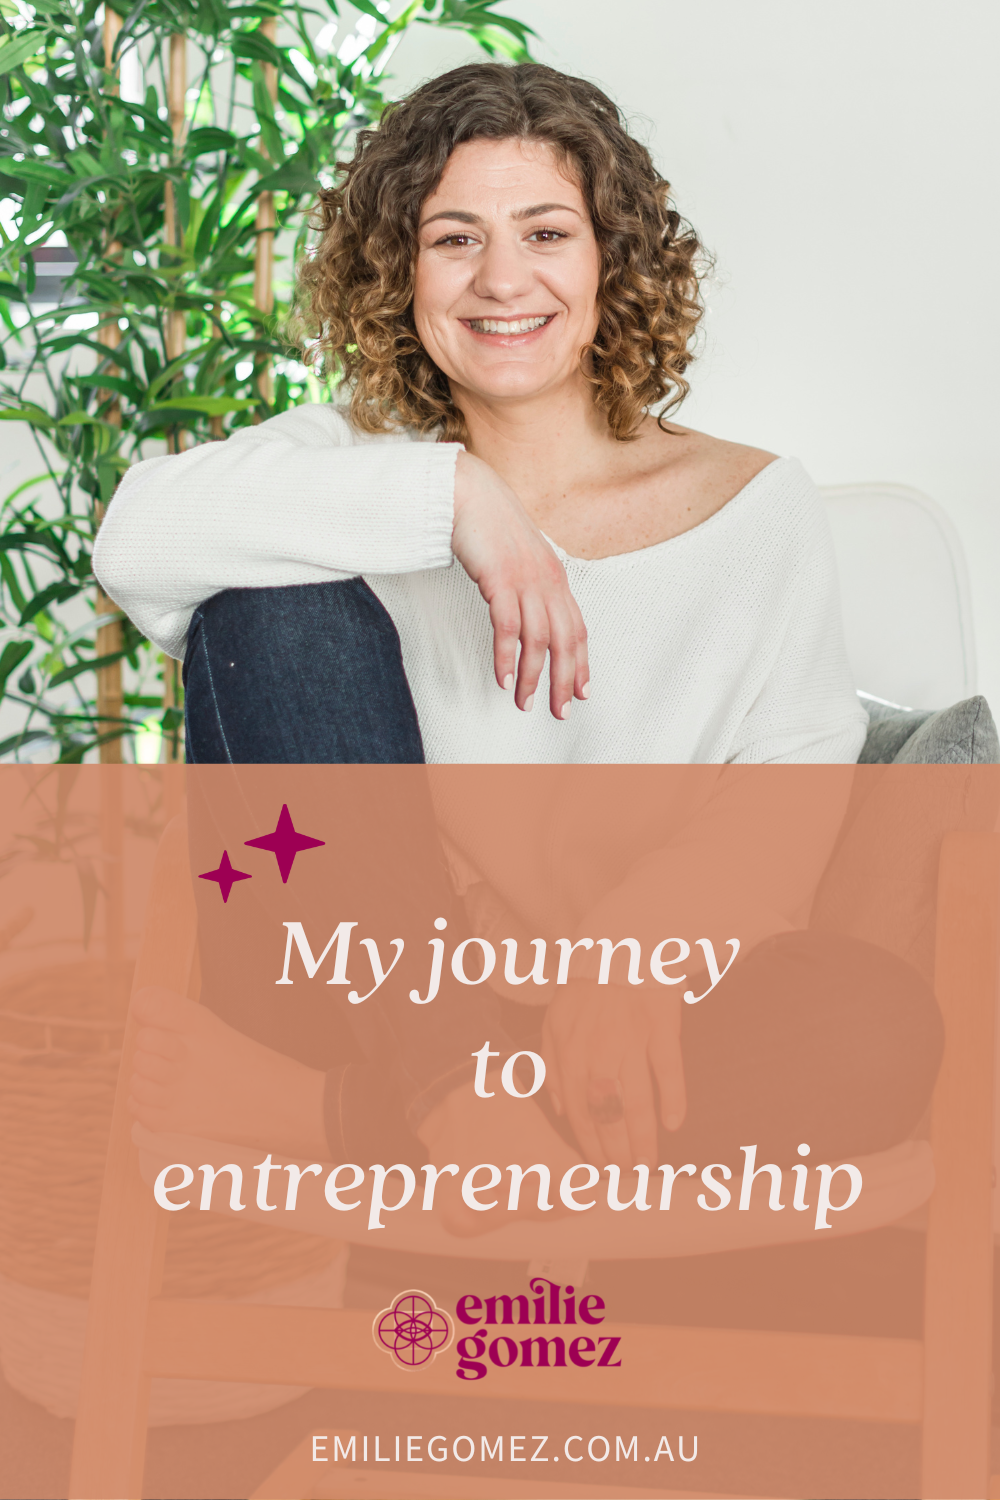 Listen to my interview in Sora Schilling’s Sacred Business Podcast, where we discuss my transition from the corporate world into entrepreneurship - from my first coaching and healing practice to my current business, helping womxn coaches and healers build businesses that grow with ease and flow.
#entrepreneurship #podcast